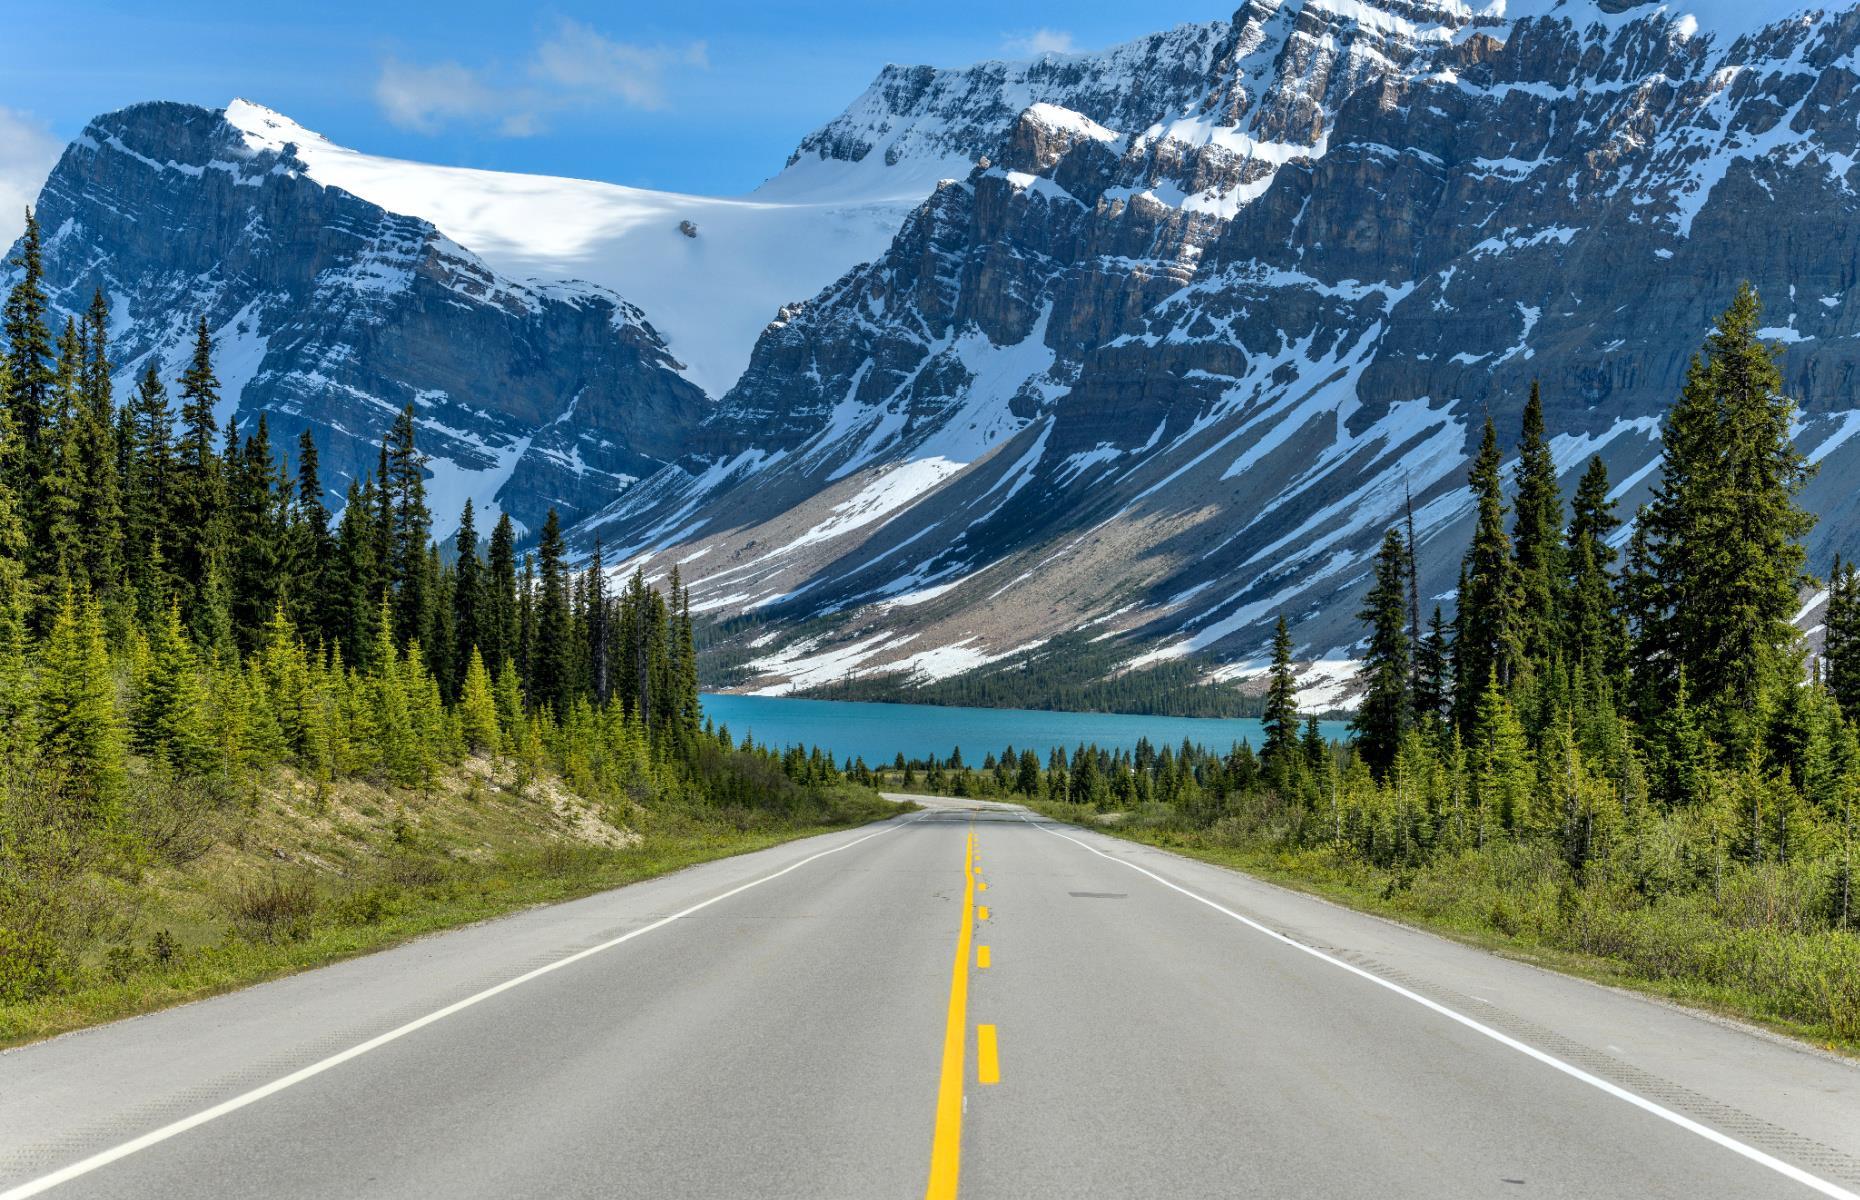 When it comes to road-tripping, there’s a lot of ground to cover in Canada. It’s best to discover the world’s second-largest country bit by bit, with short road trips that reveal what makes each of the country’s provinces and territories unique. All 25 of these Canadian adventures can easily be taken over the course of a weekend.